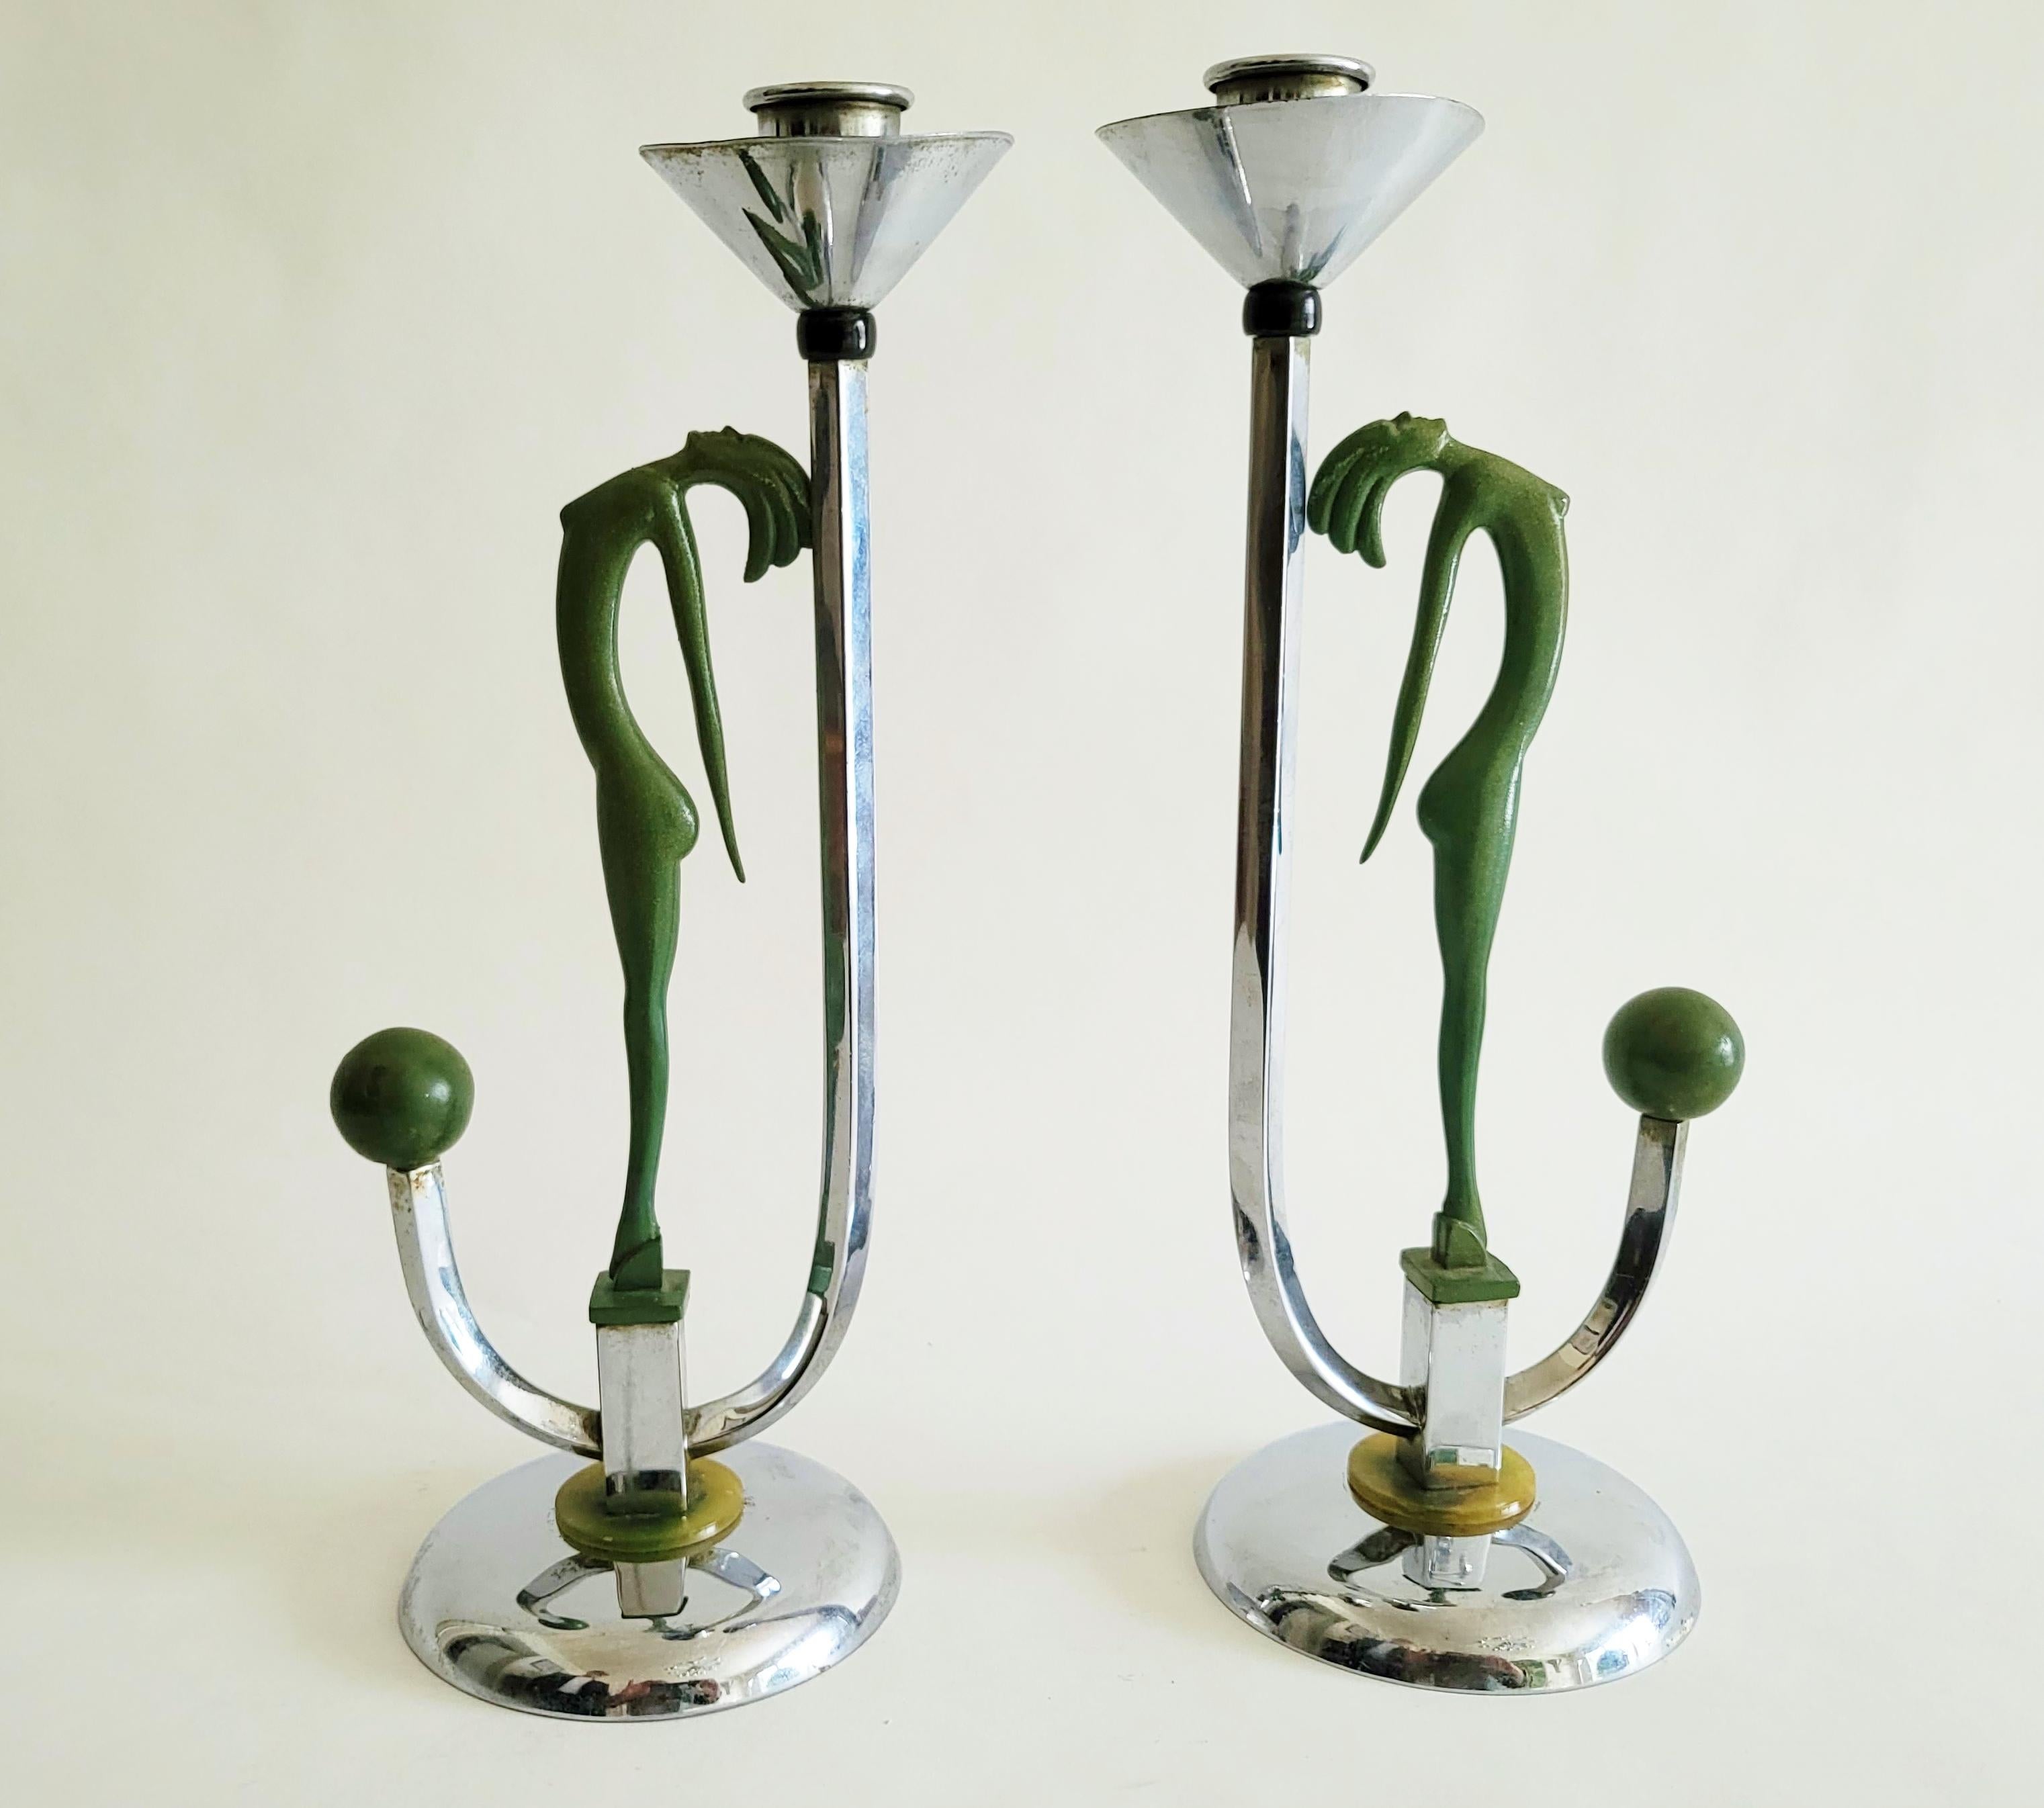 Pair of English Gec Art Deco Chrome, Bakelite & Hagenauer Figure Candlesticks In Good Condition For Sale In Port Hope, ON